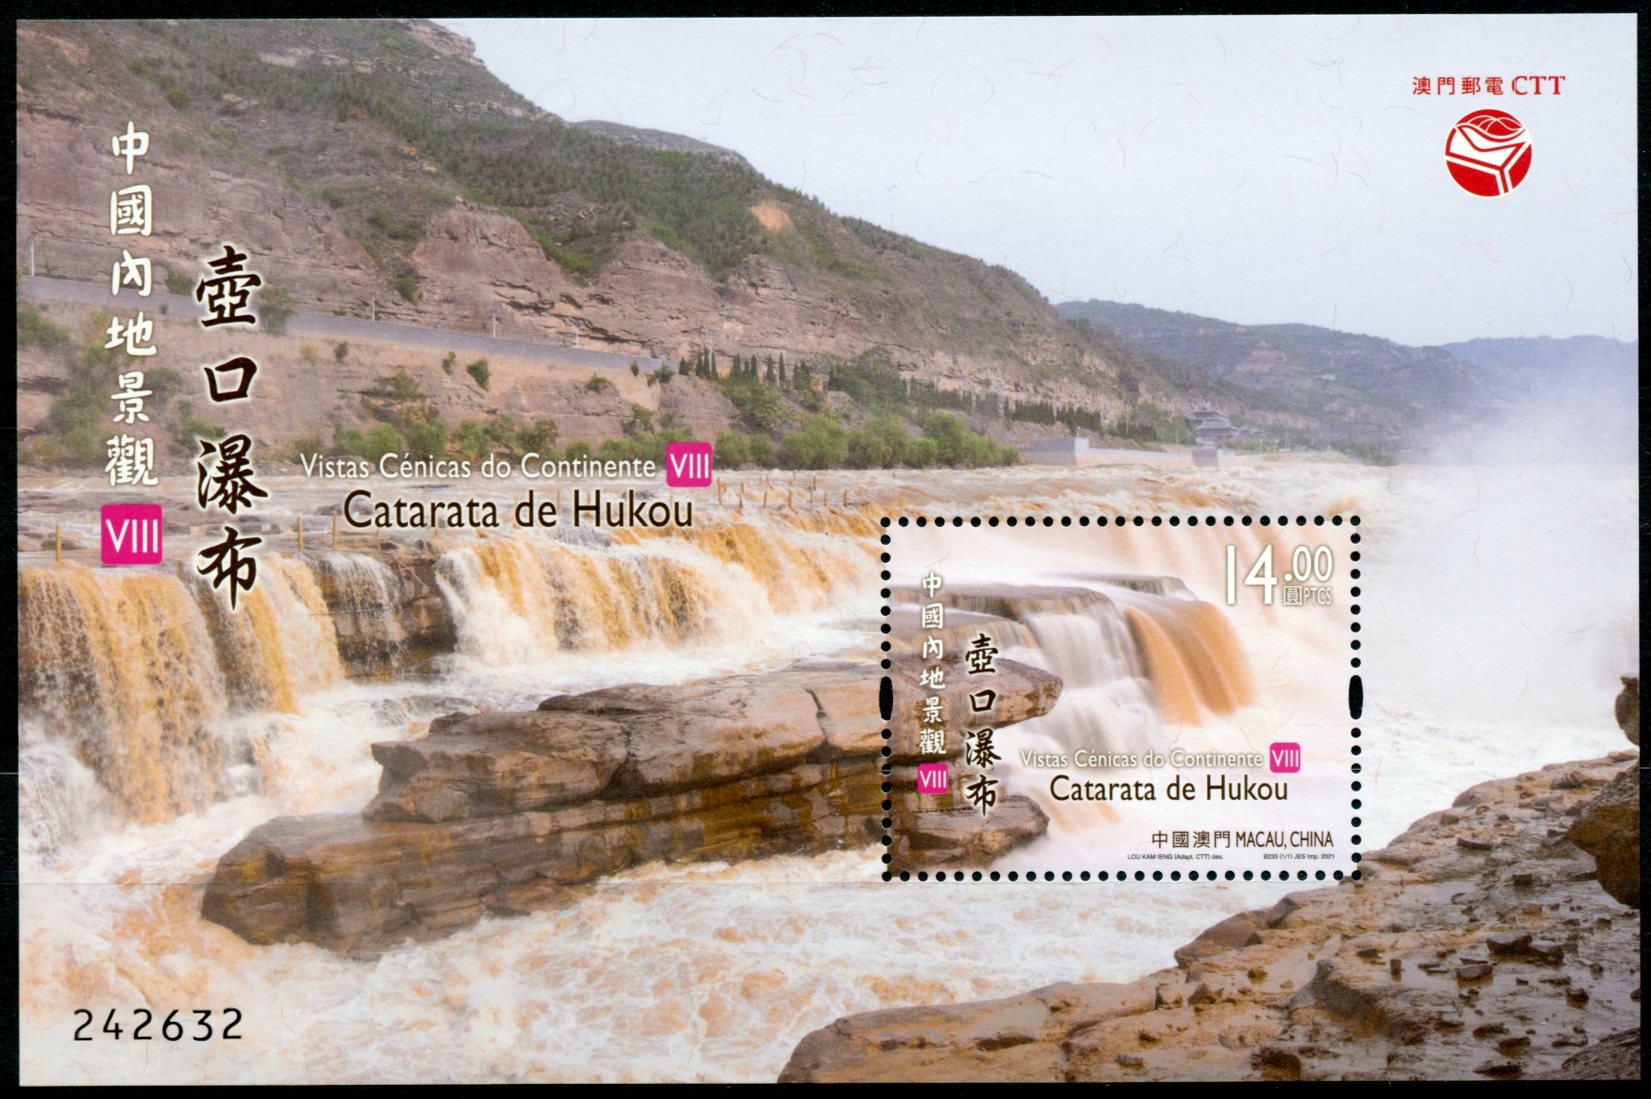 Macao Macau 2021 MNH Landscapes Stamps Mainland Scenery Hukou Waterfall Falls 1v M/S